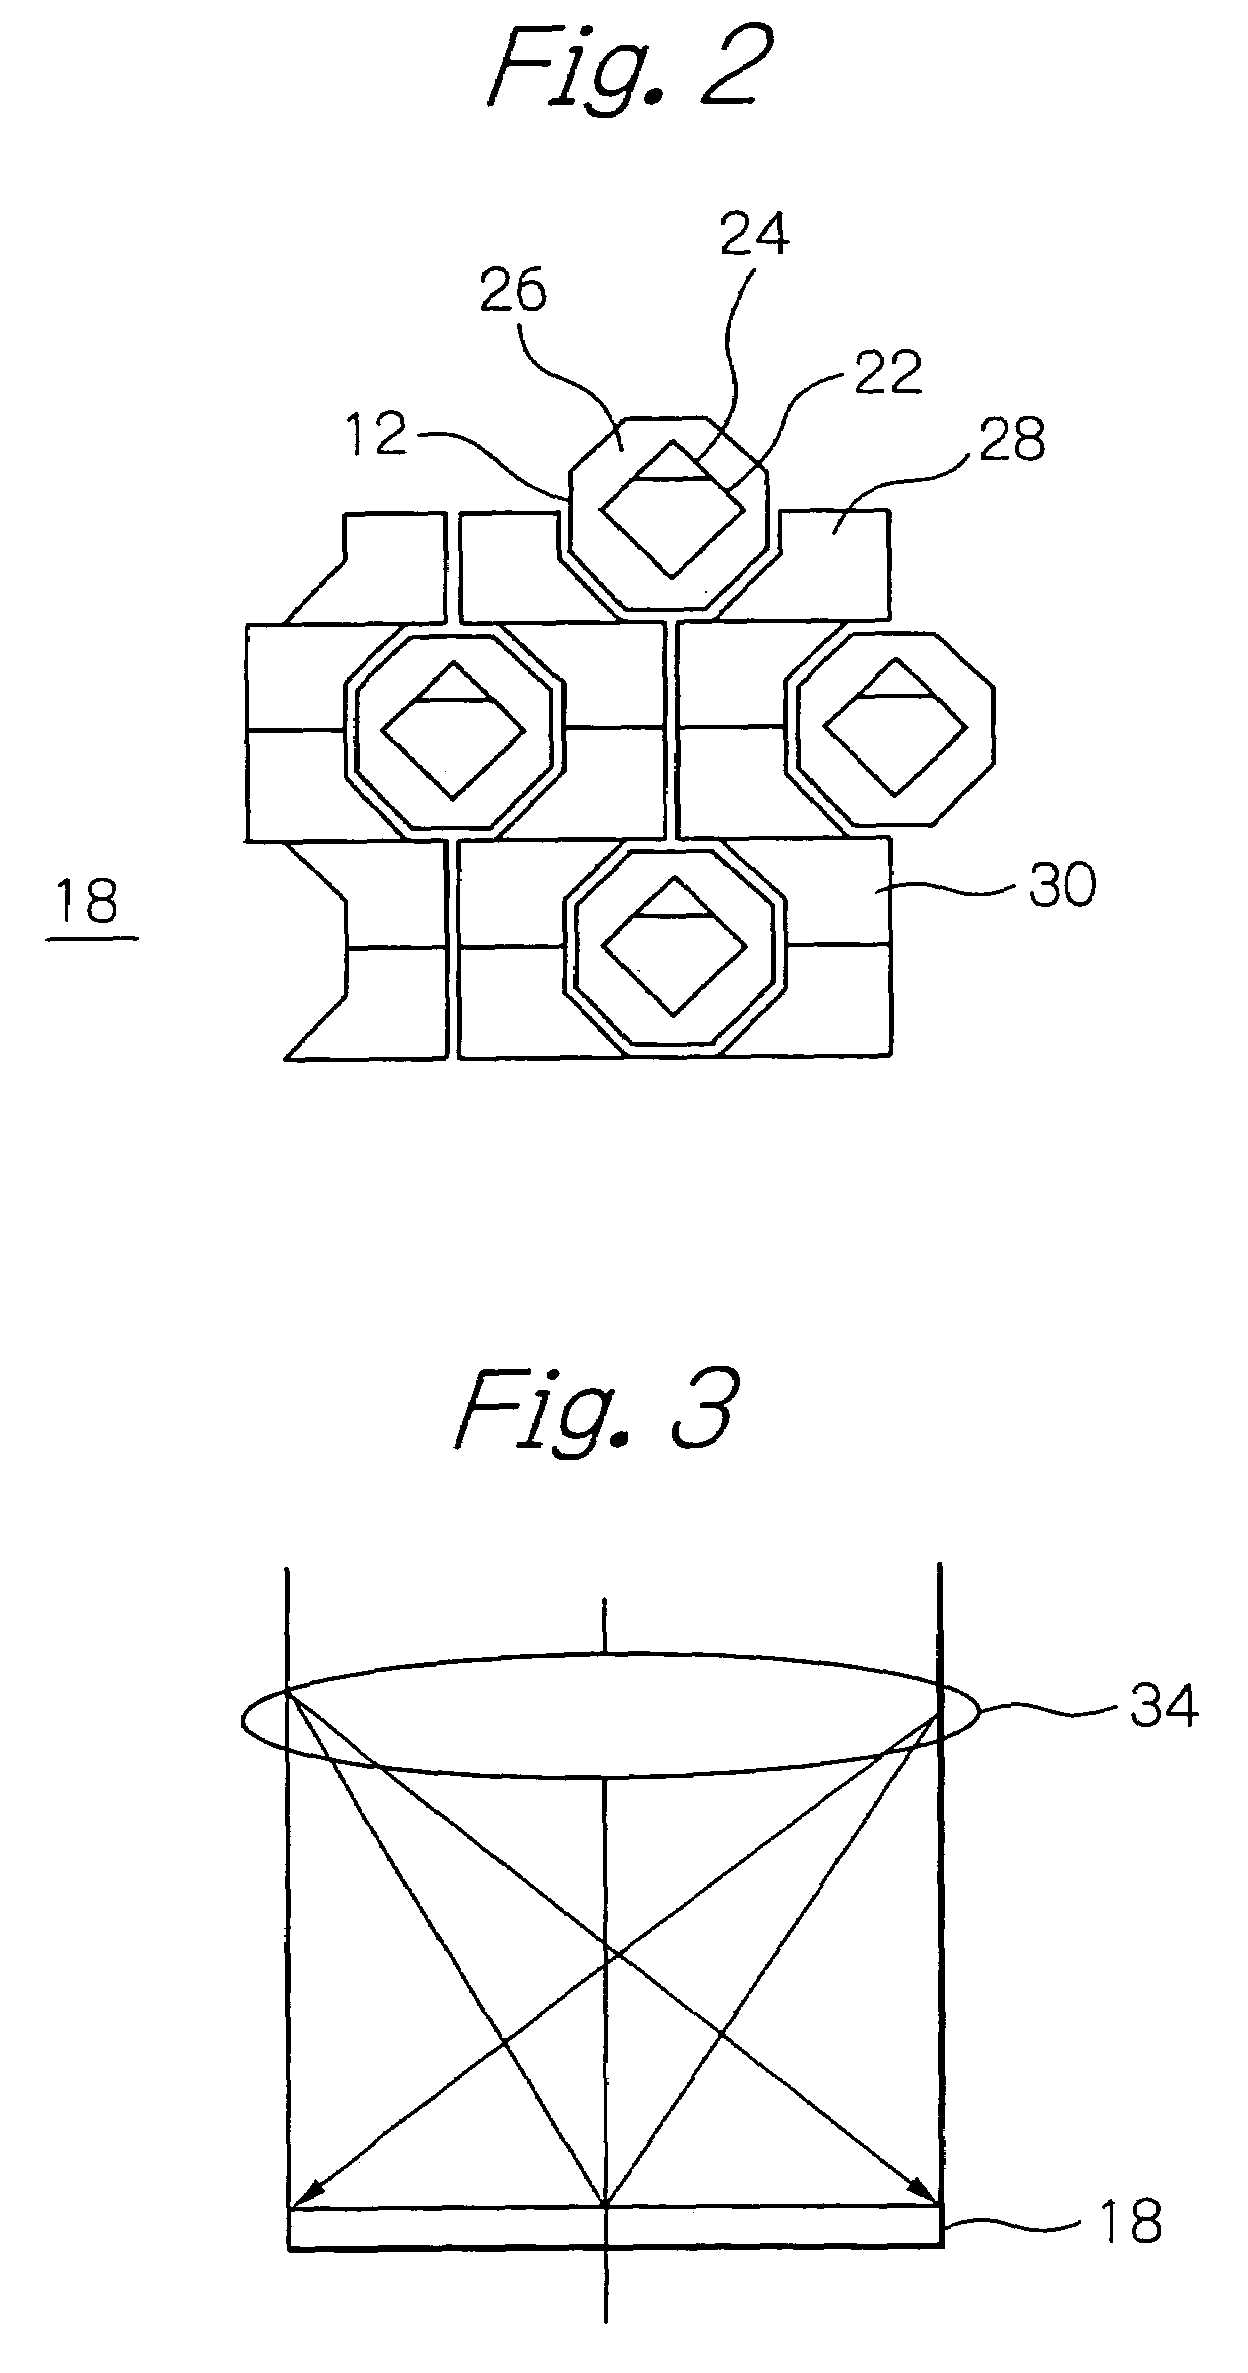 Solid-state image sensor with the optical center of microlenses shifted from the center of photo-sensors for increasing the convergence ratio